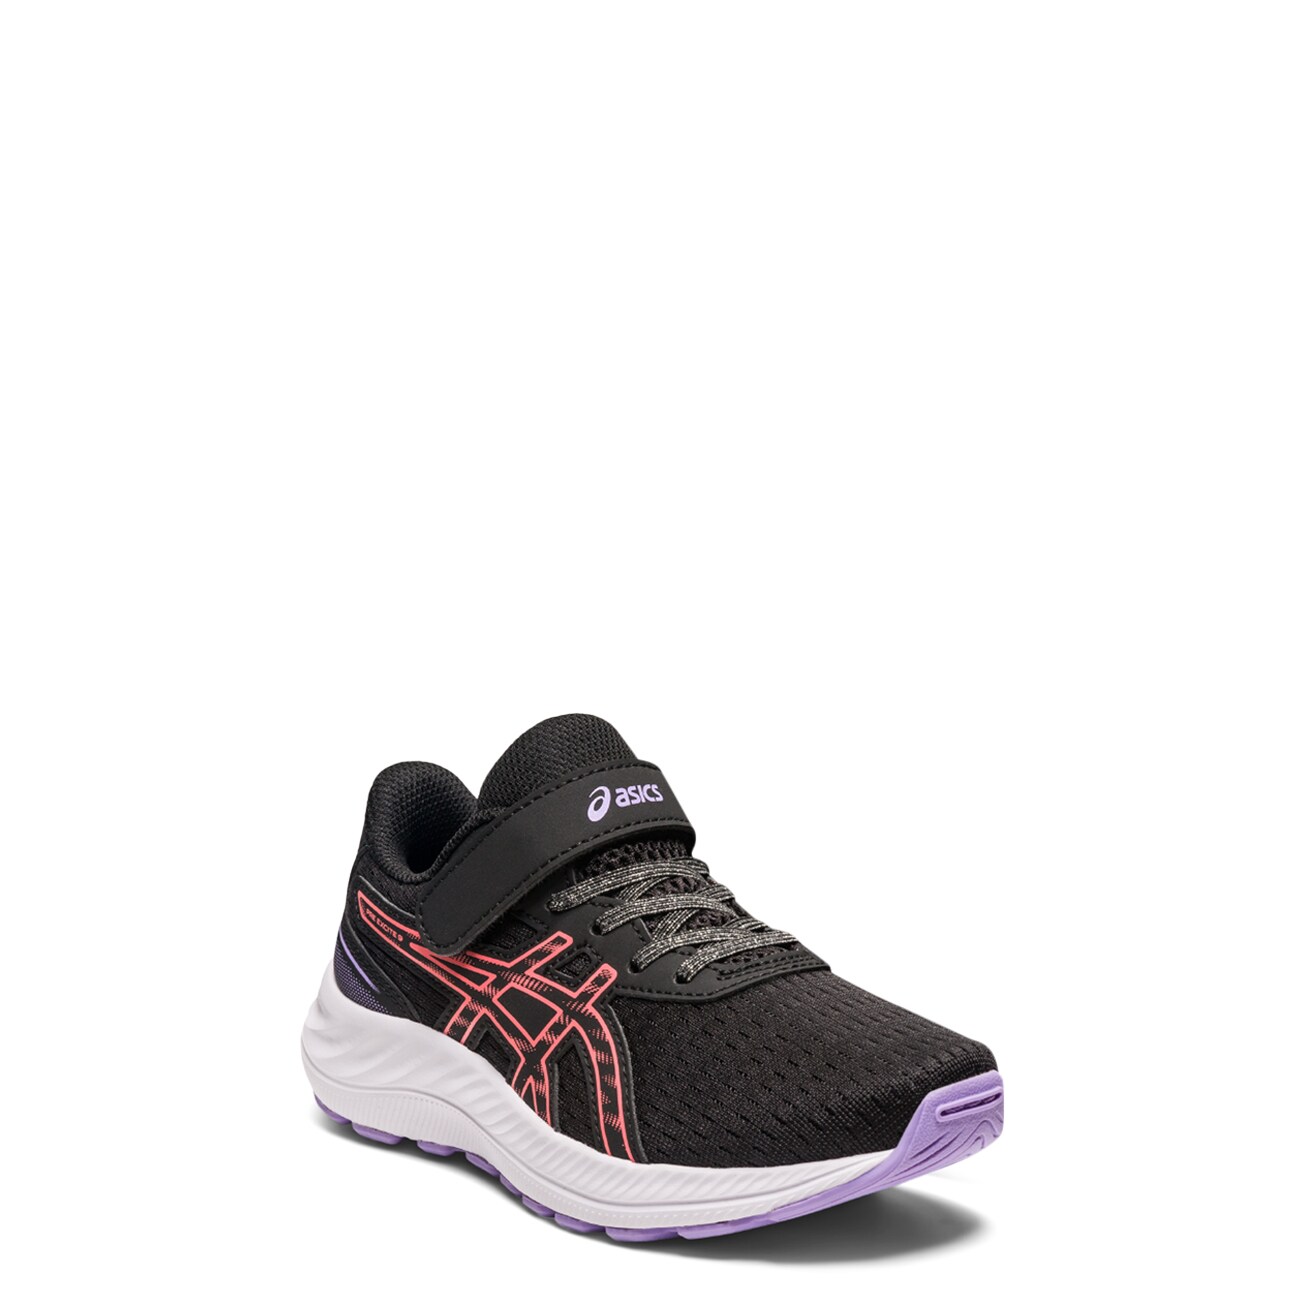 Youth Girls' Pre Excite 9 PS Running Shoe